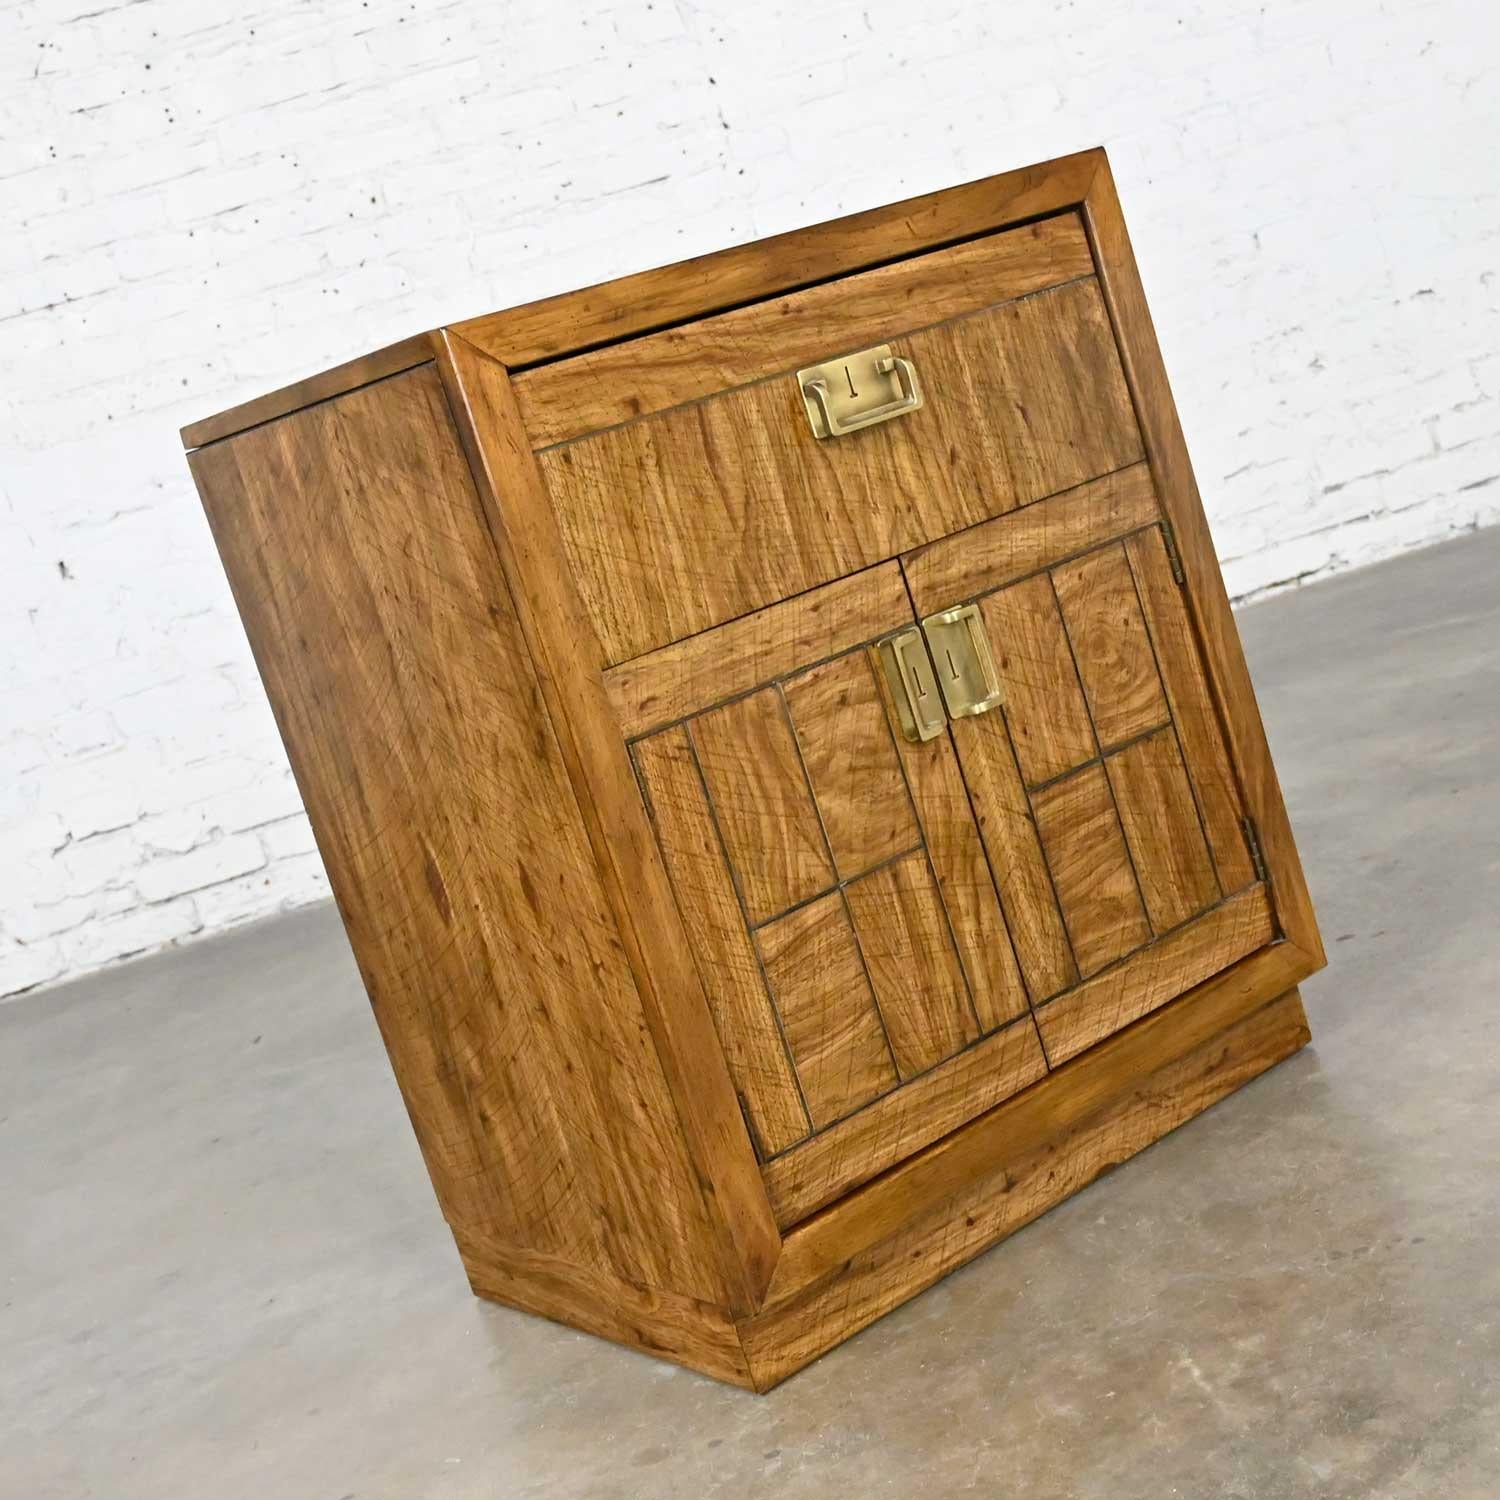 Vintage Drexel Weatherwood Collection Campaign Style End Table Cabinet or Chest In Good Condition For Sale In Topeka, KS